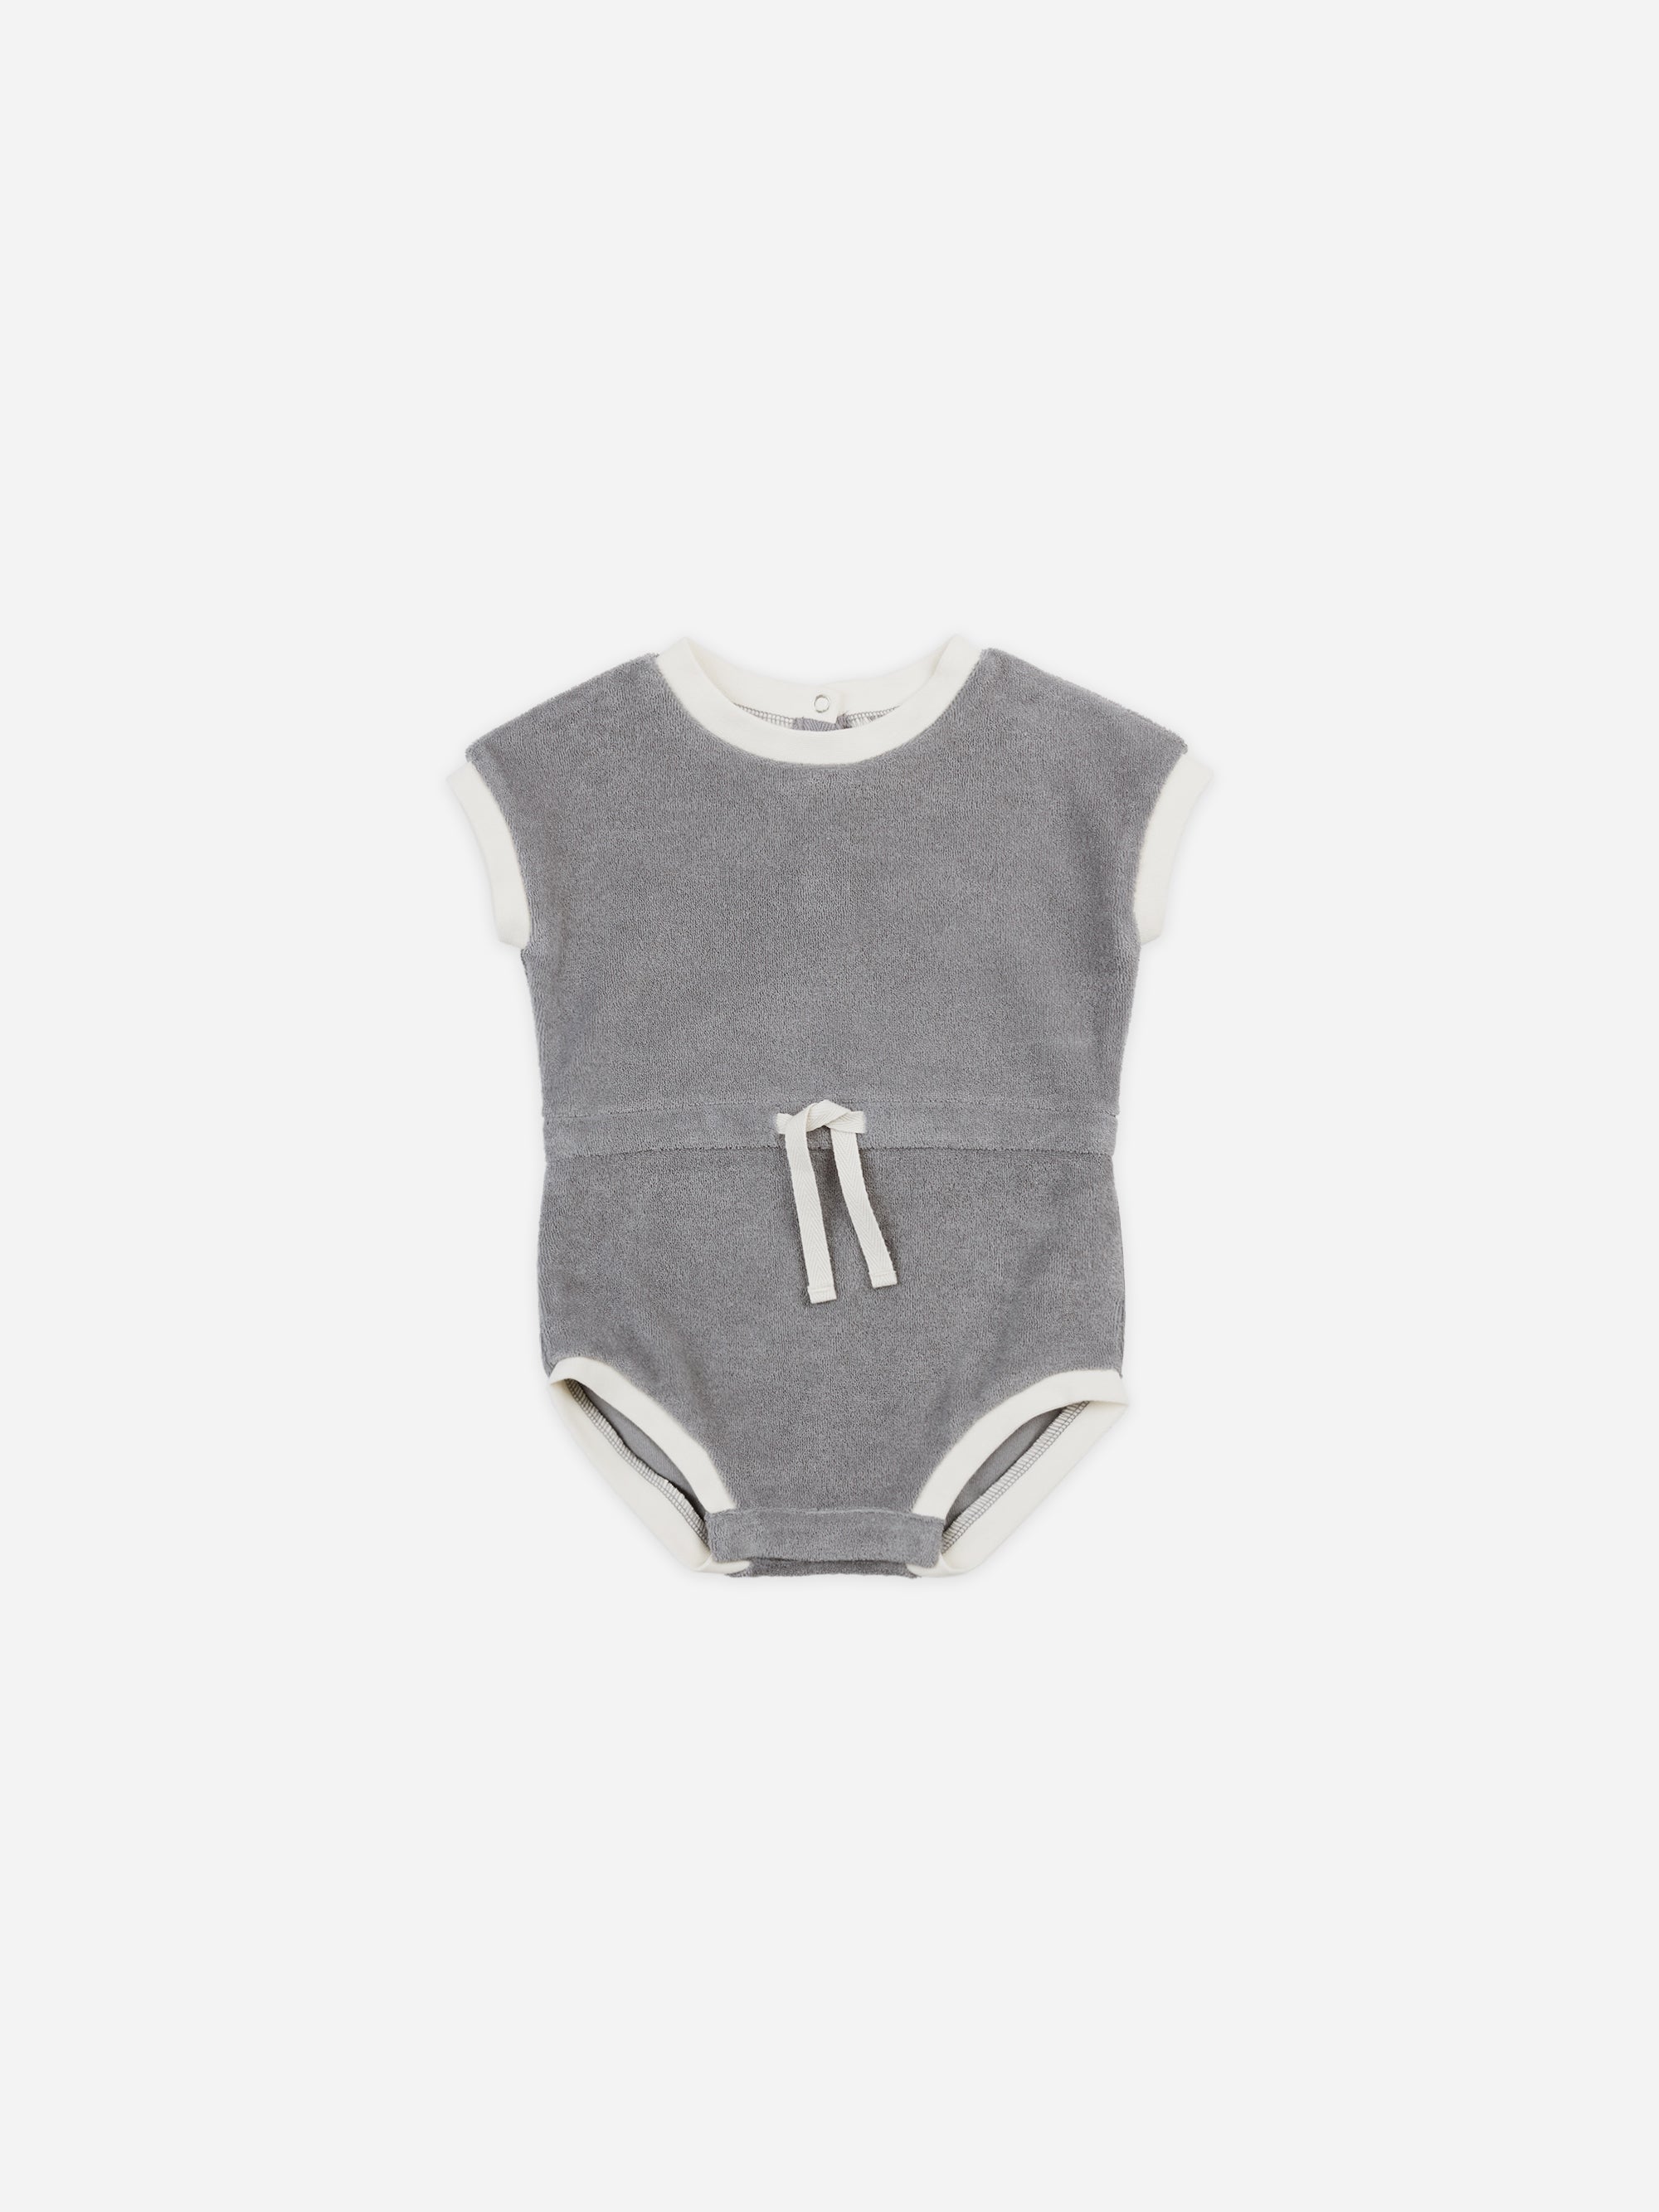 Retro Romper || Lagoon - Rylee + Cru | Kids Clothes | Trendy Baby Clothes | Modern Infant Outfits |